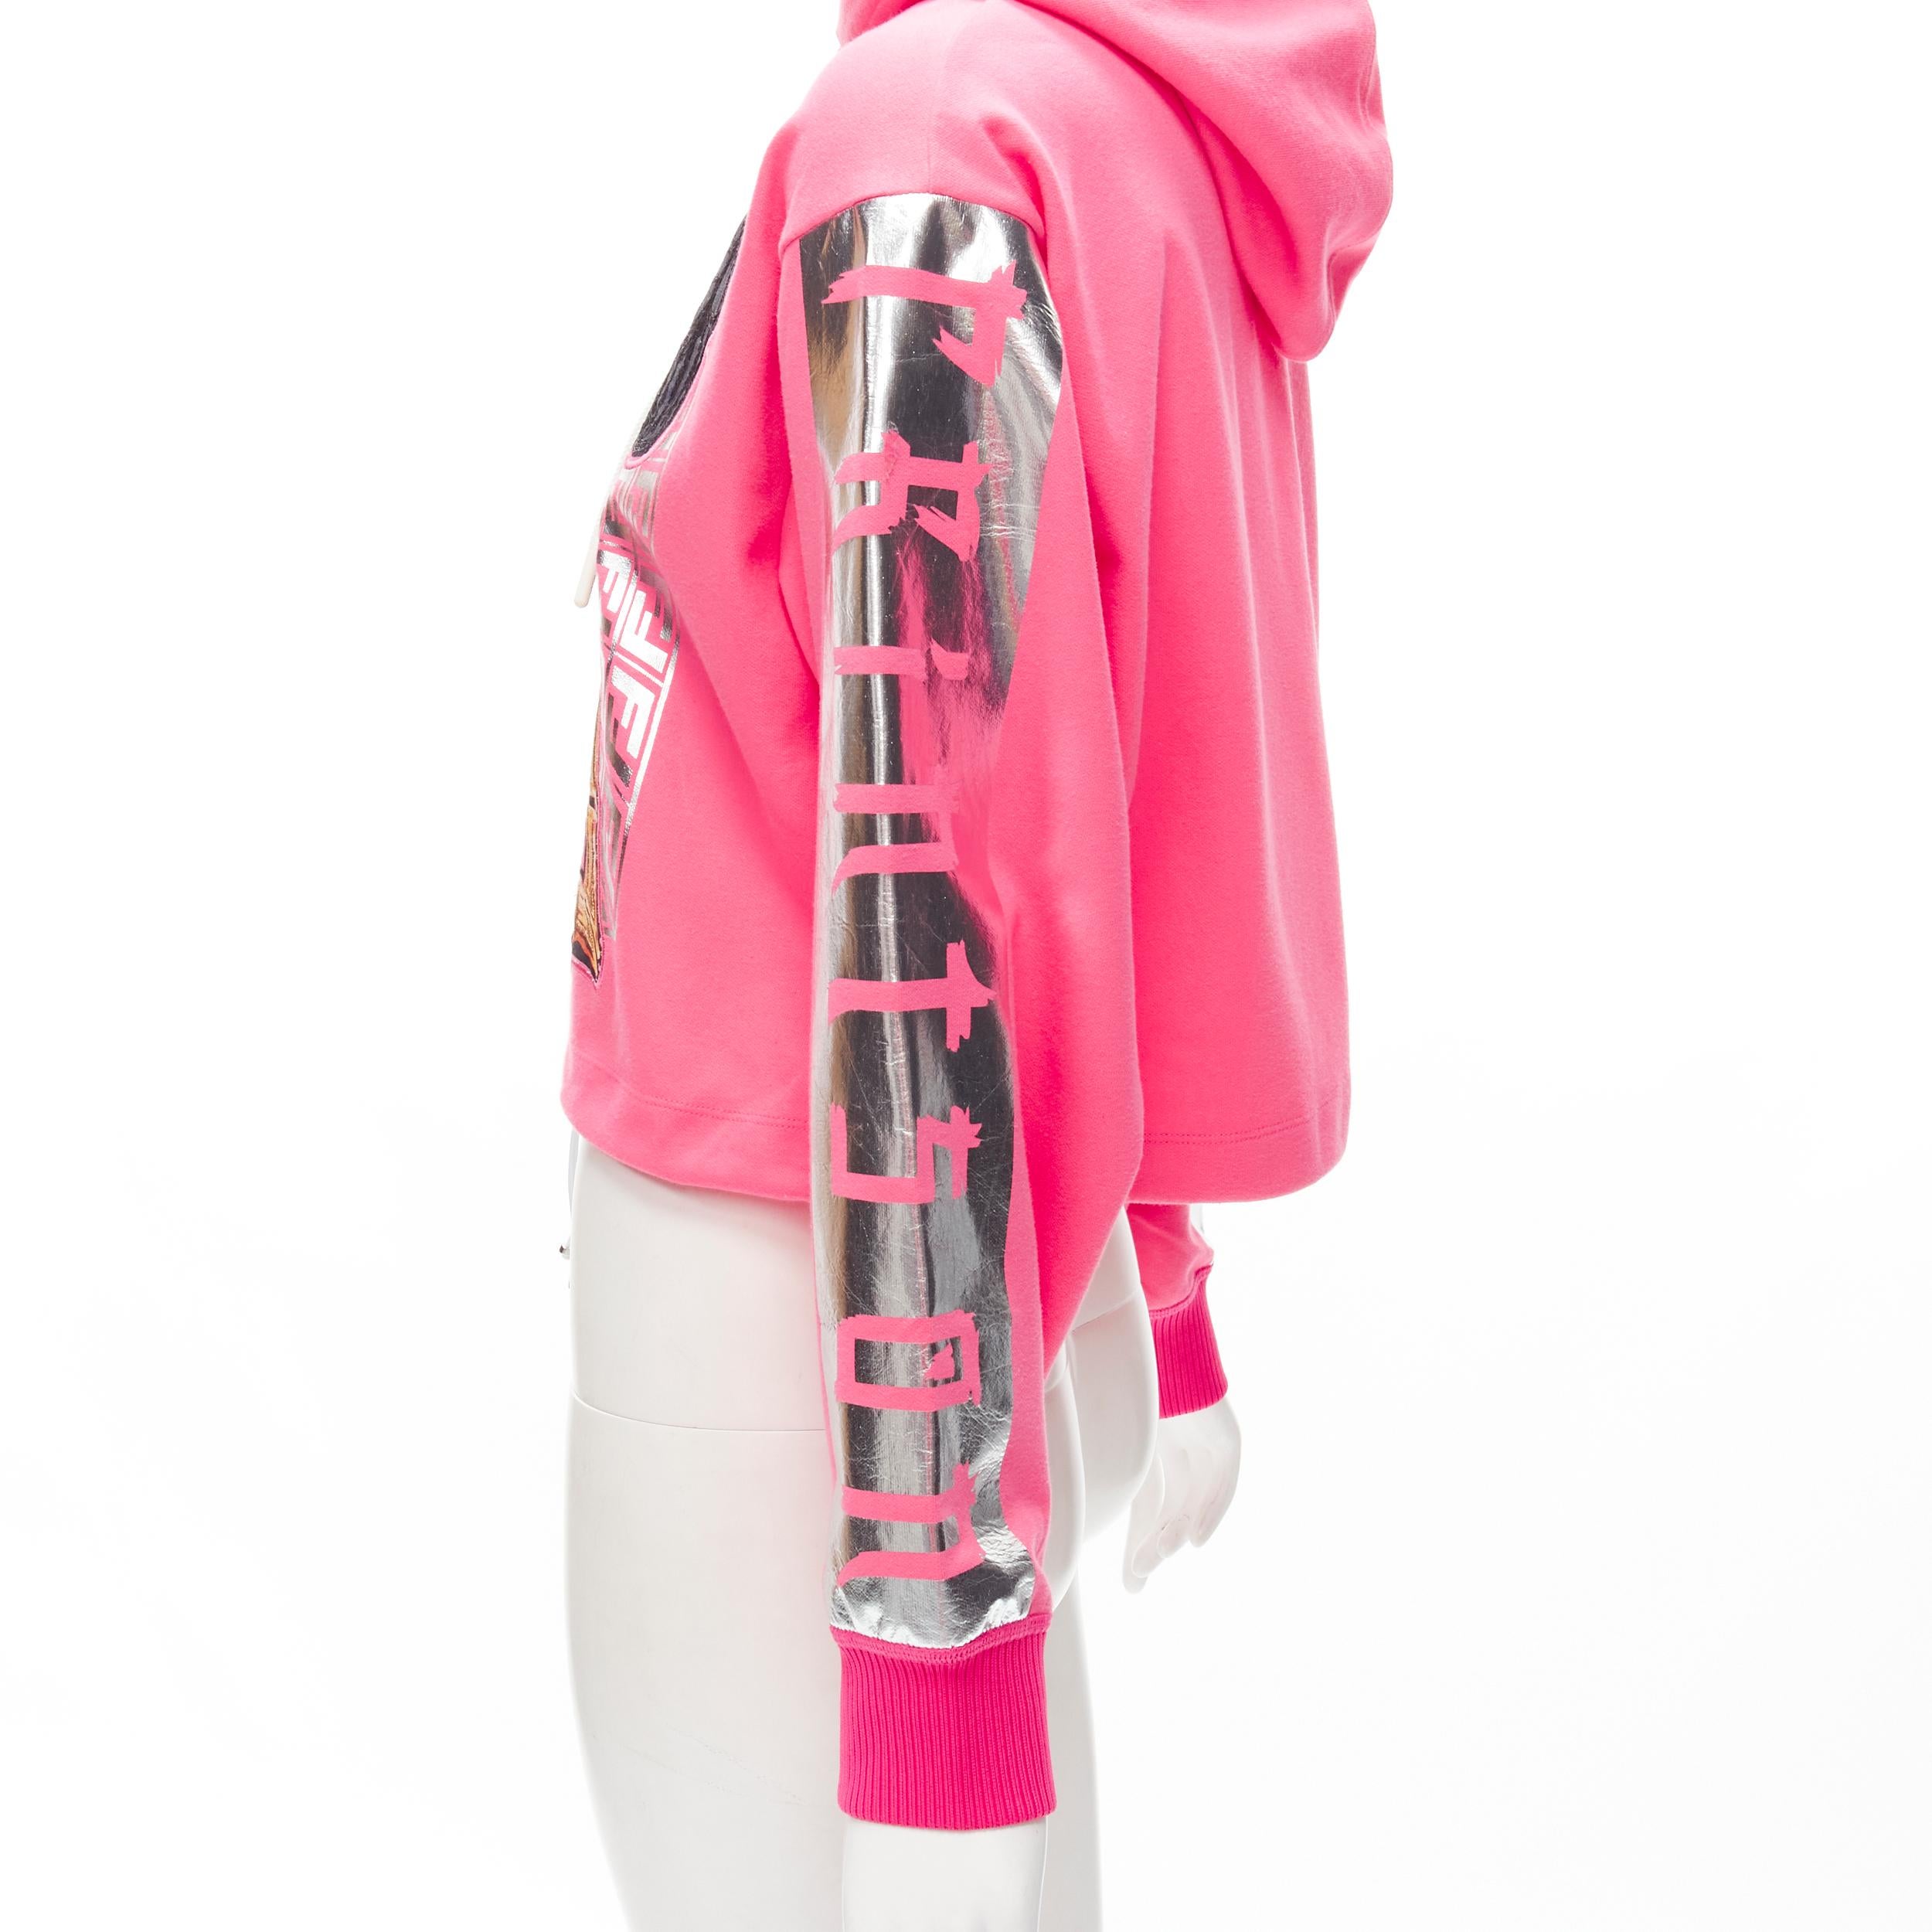 FENDI Nicki Minaj Prints On pink silver foil print cropped hoodie S 
Reference: ANWU/A00470 
Brand: Fendi 
Collection: Nicki Minaj Prints On 
Material: Cotton 
Color: Pink 
Pattern: Solid 
Extra Detail: Drawstring hood and at hem. 

CONDITION: